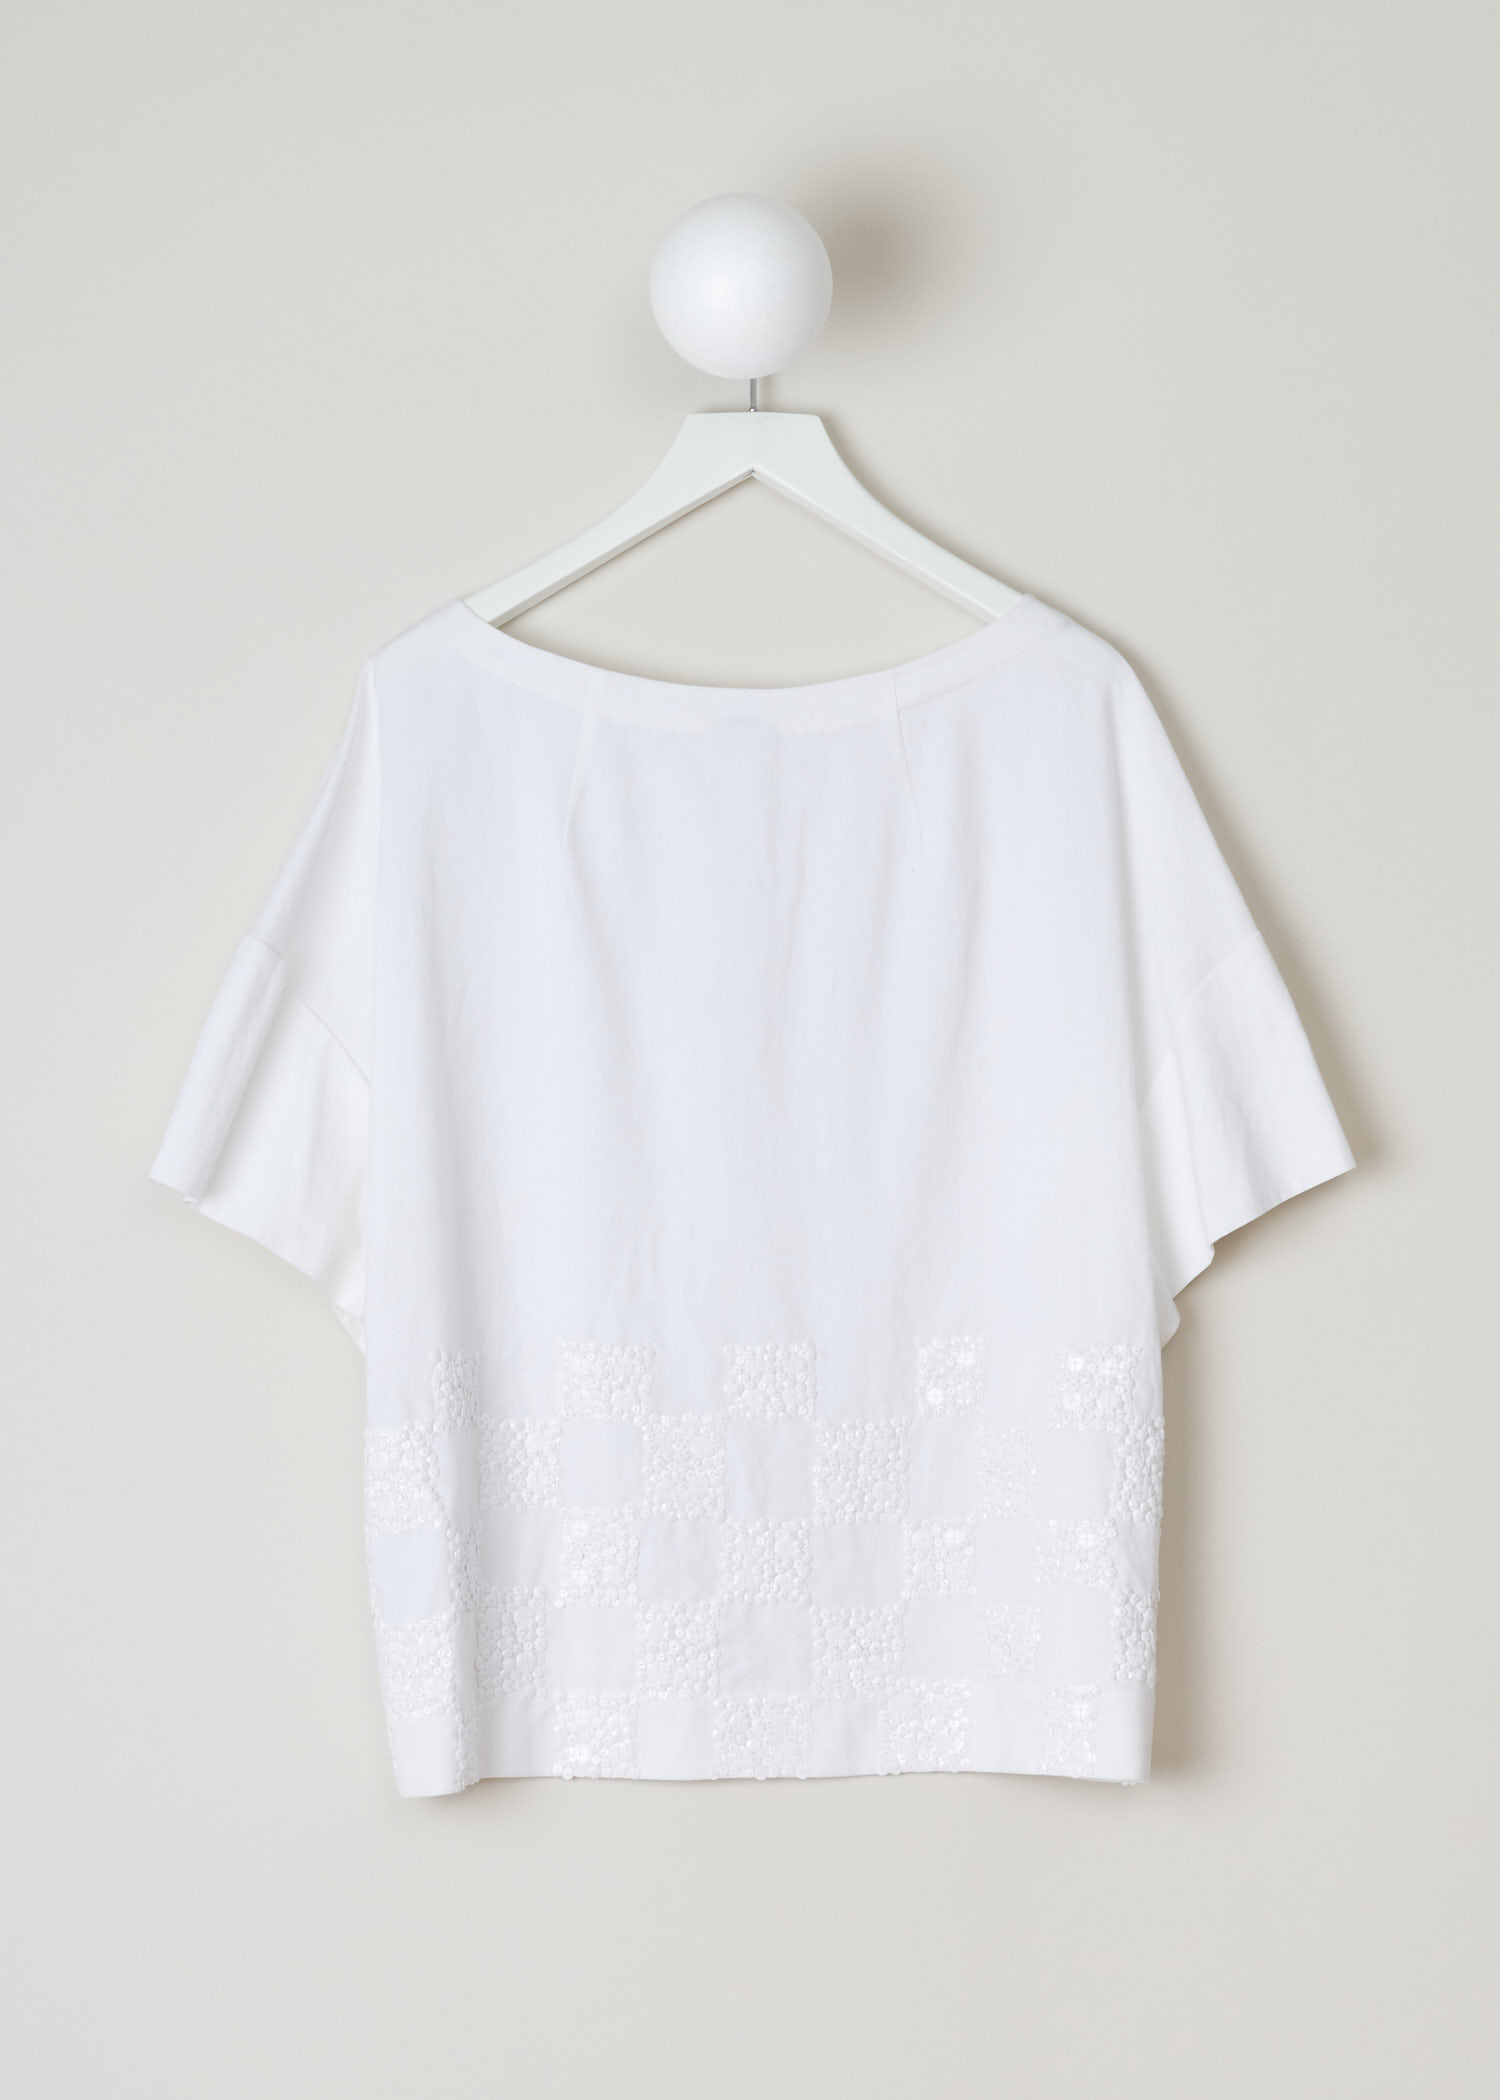 Dries Van Noten, White sequins top, COBALA_EMB_7327_WW_SHIRT_WHI, white, back, This wide crew neck top is made with sequins on the lower half of the top. The sleeves are also made wide to match the neck line. 